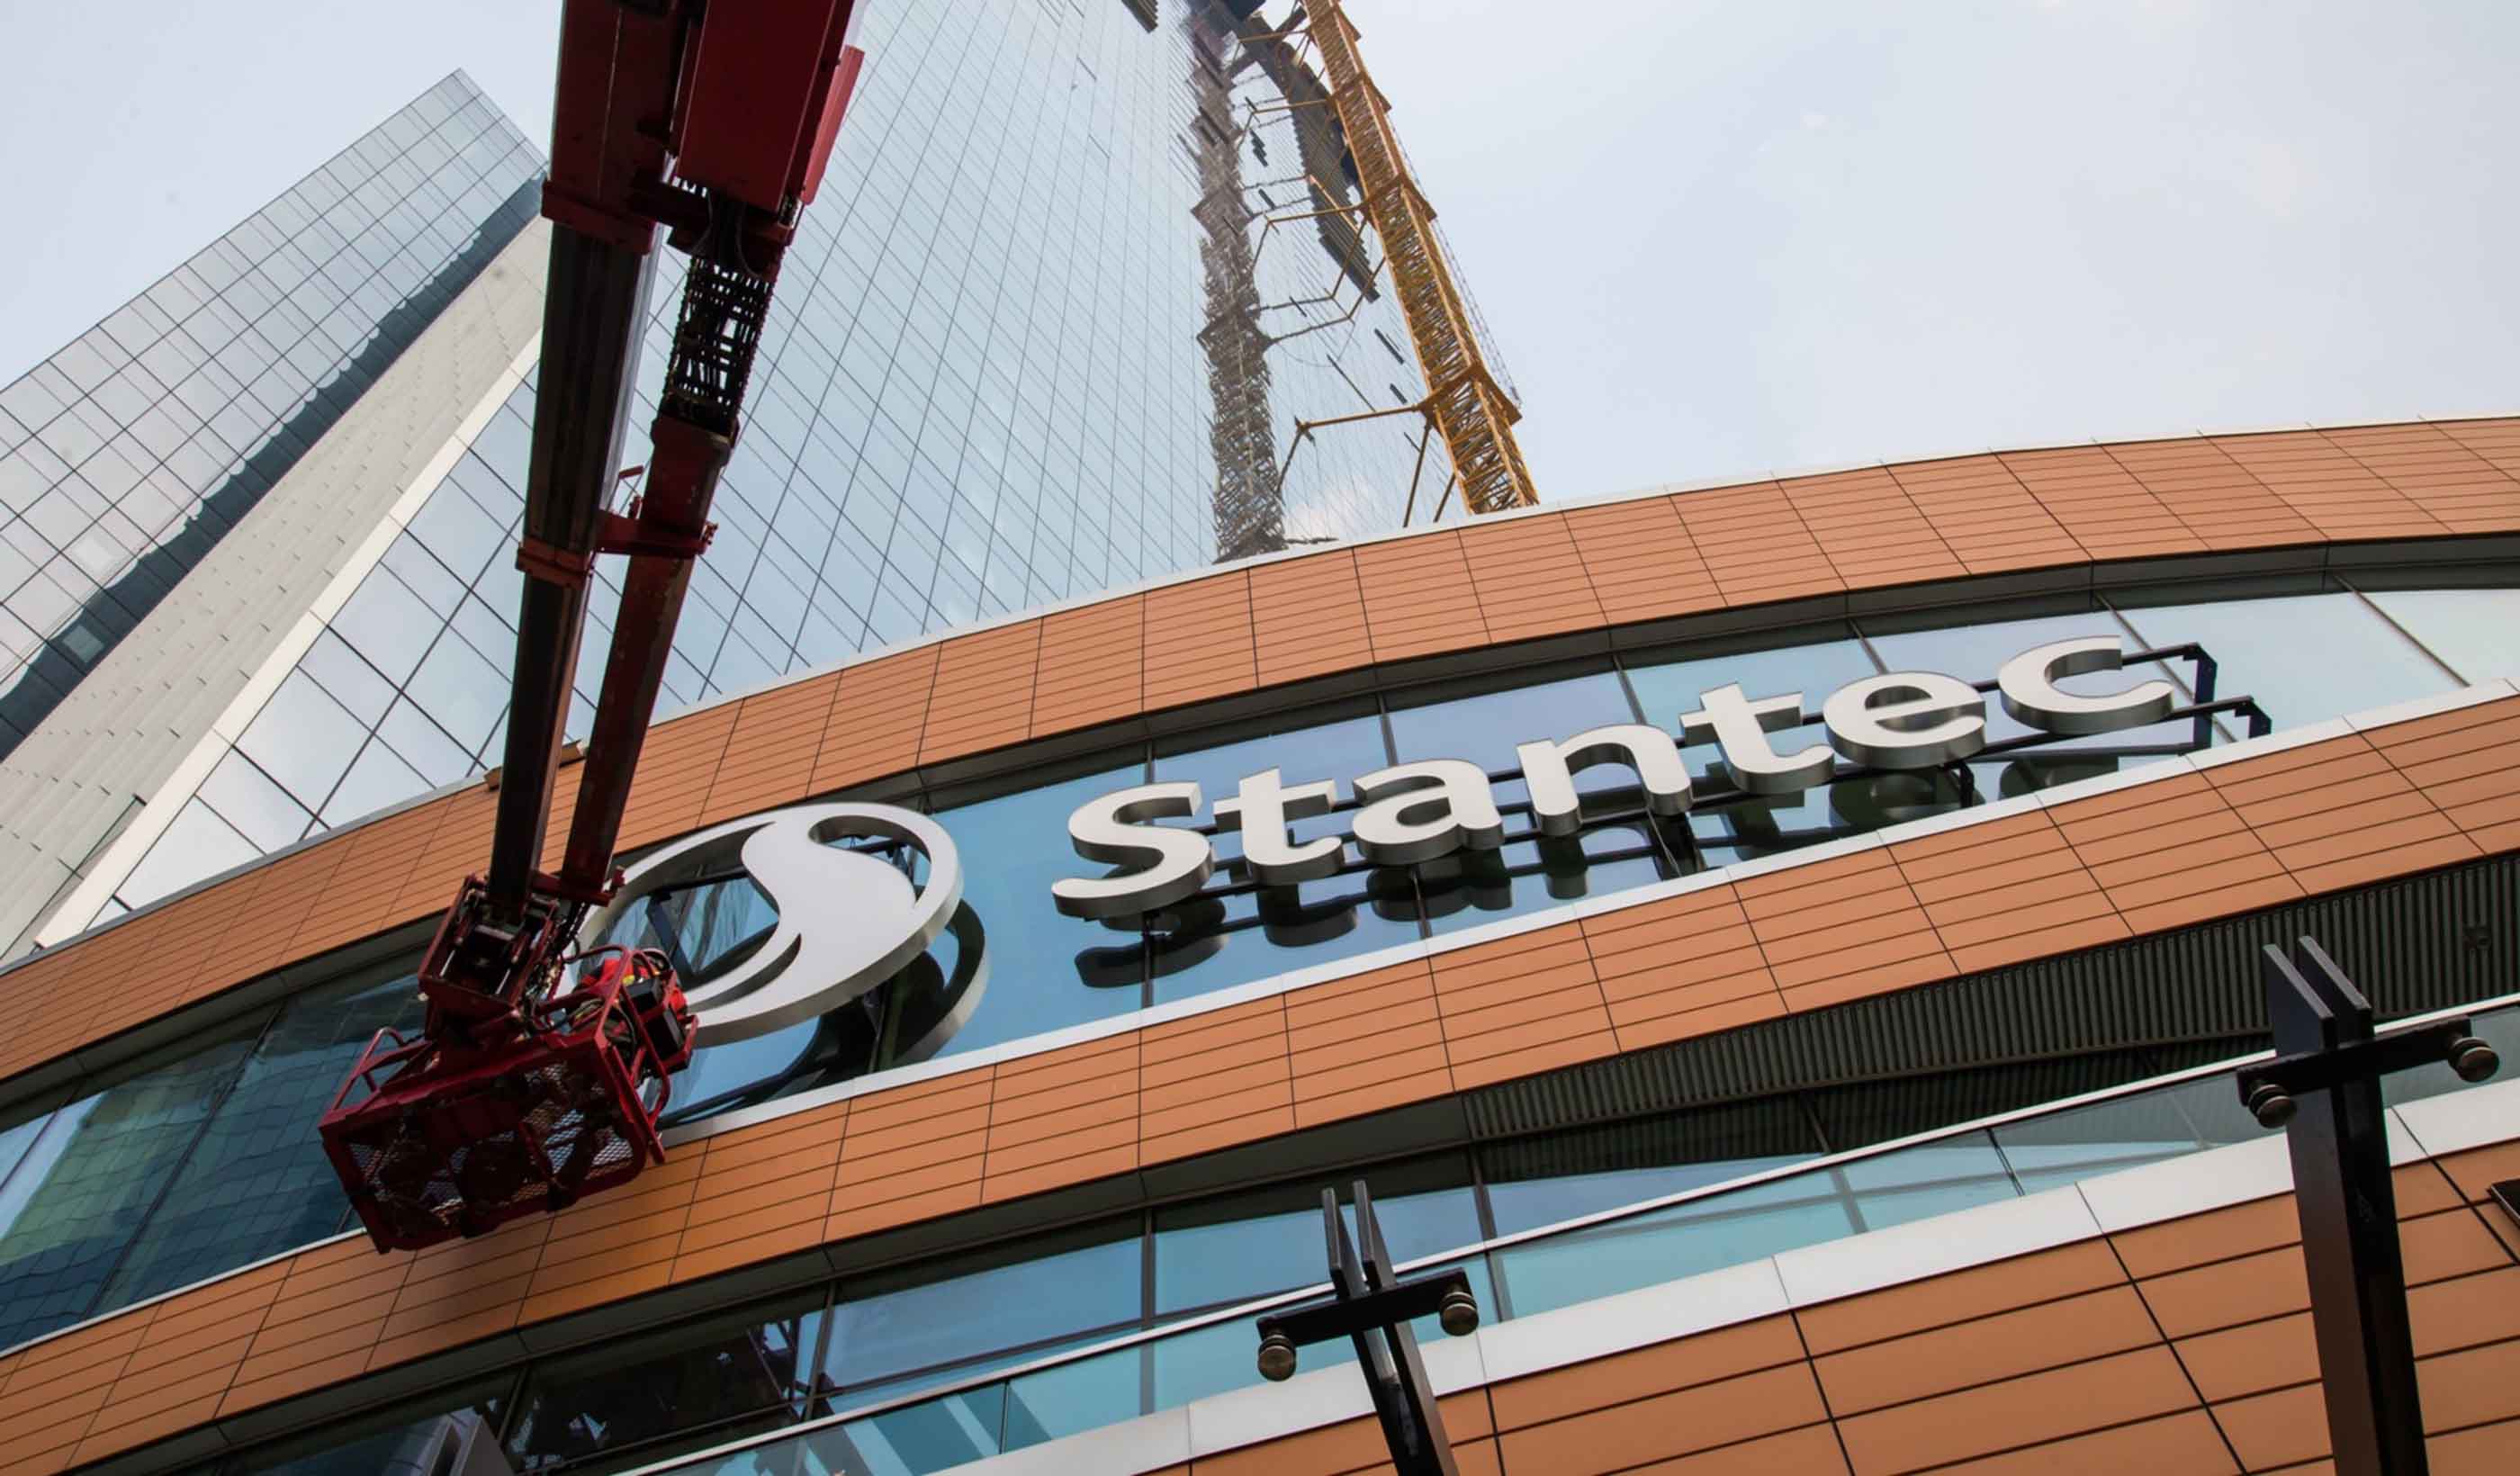 Stantec: Our evolution from 1 person to a global firm